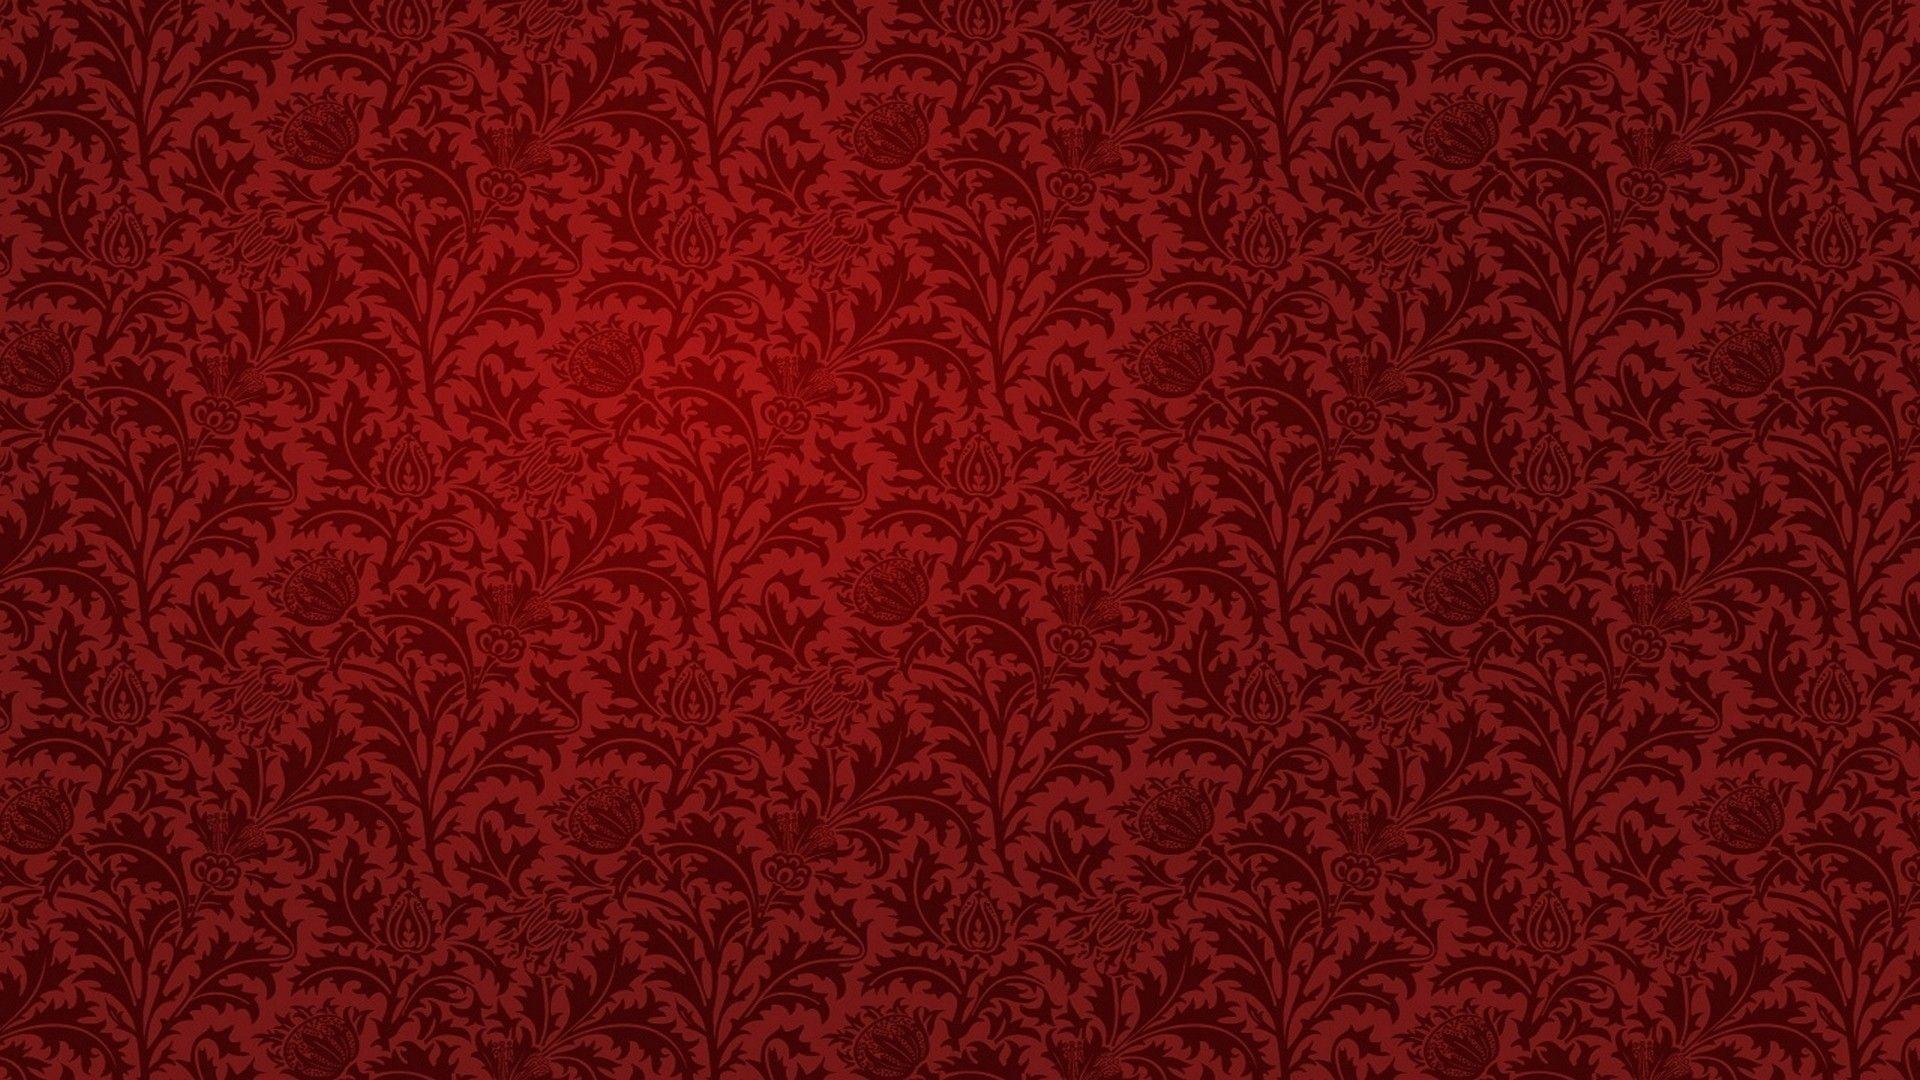 Red Damask Wallpaper 46353 1920x1080 px